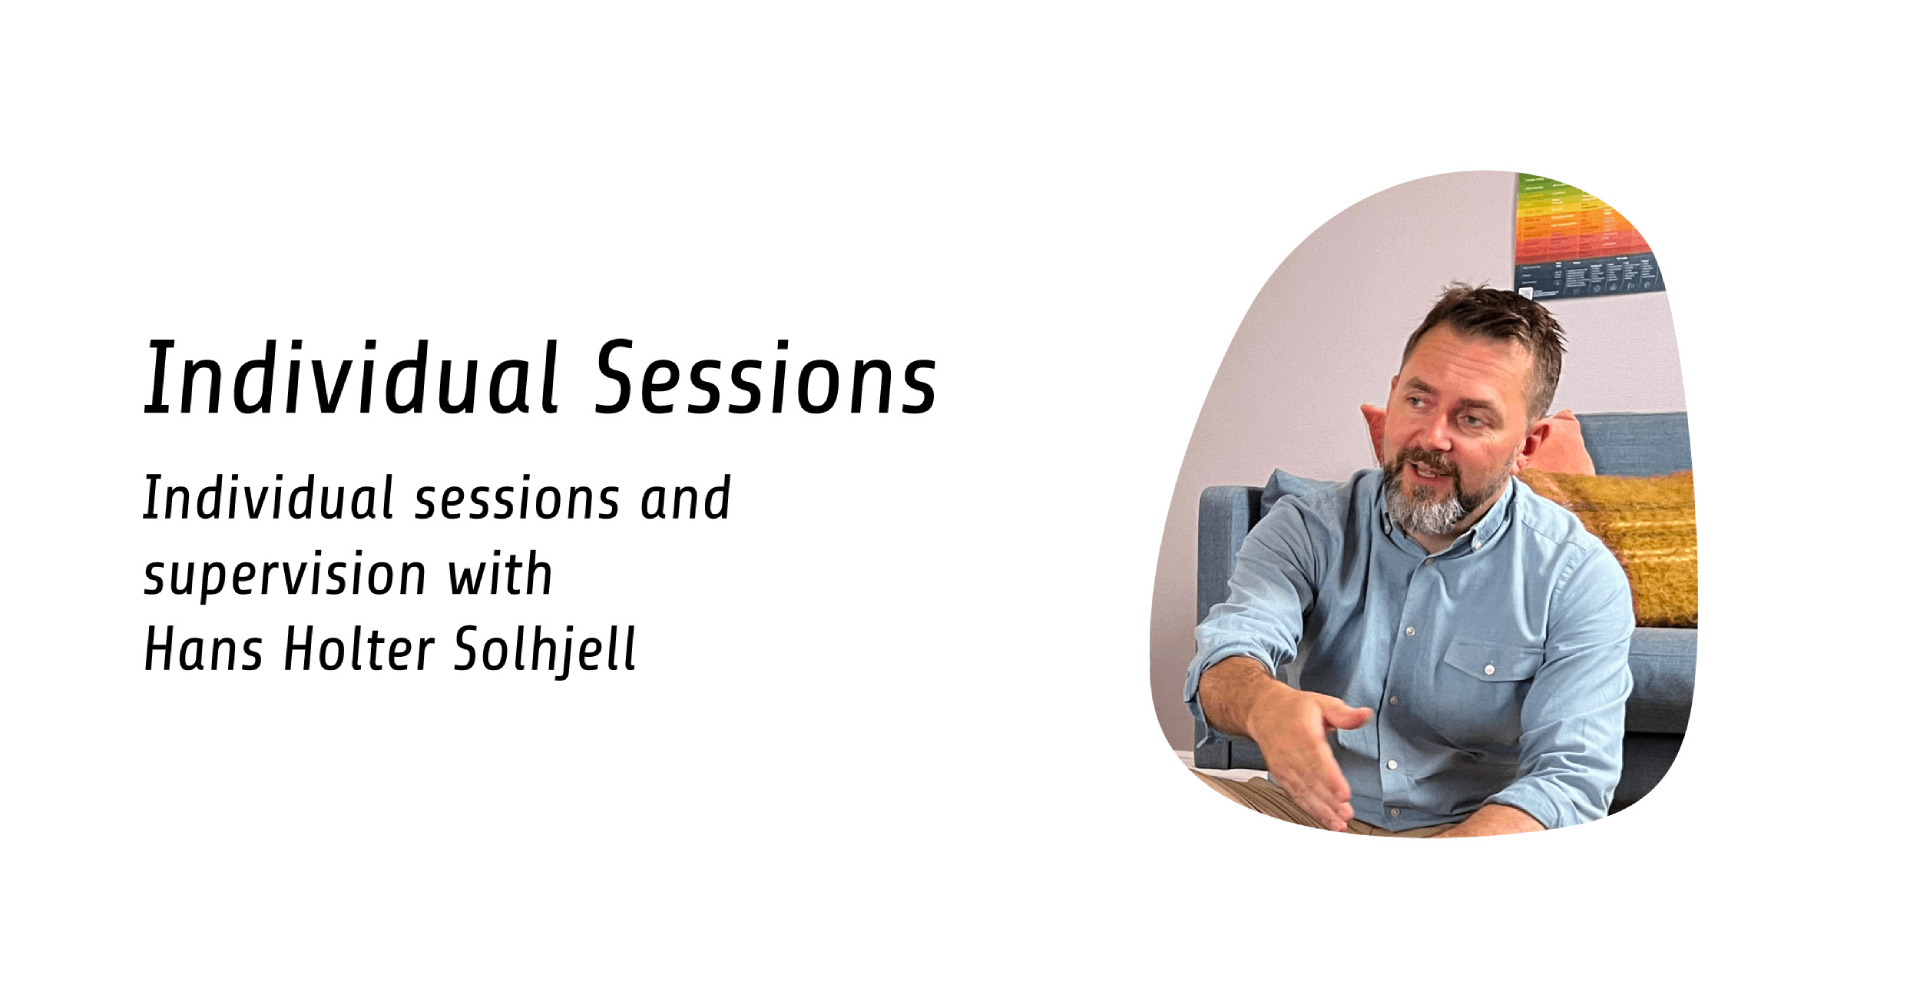 Individual sessions and supervision with Hans Holter Solhjell